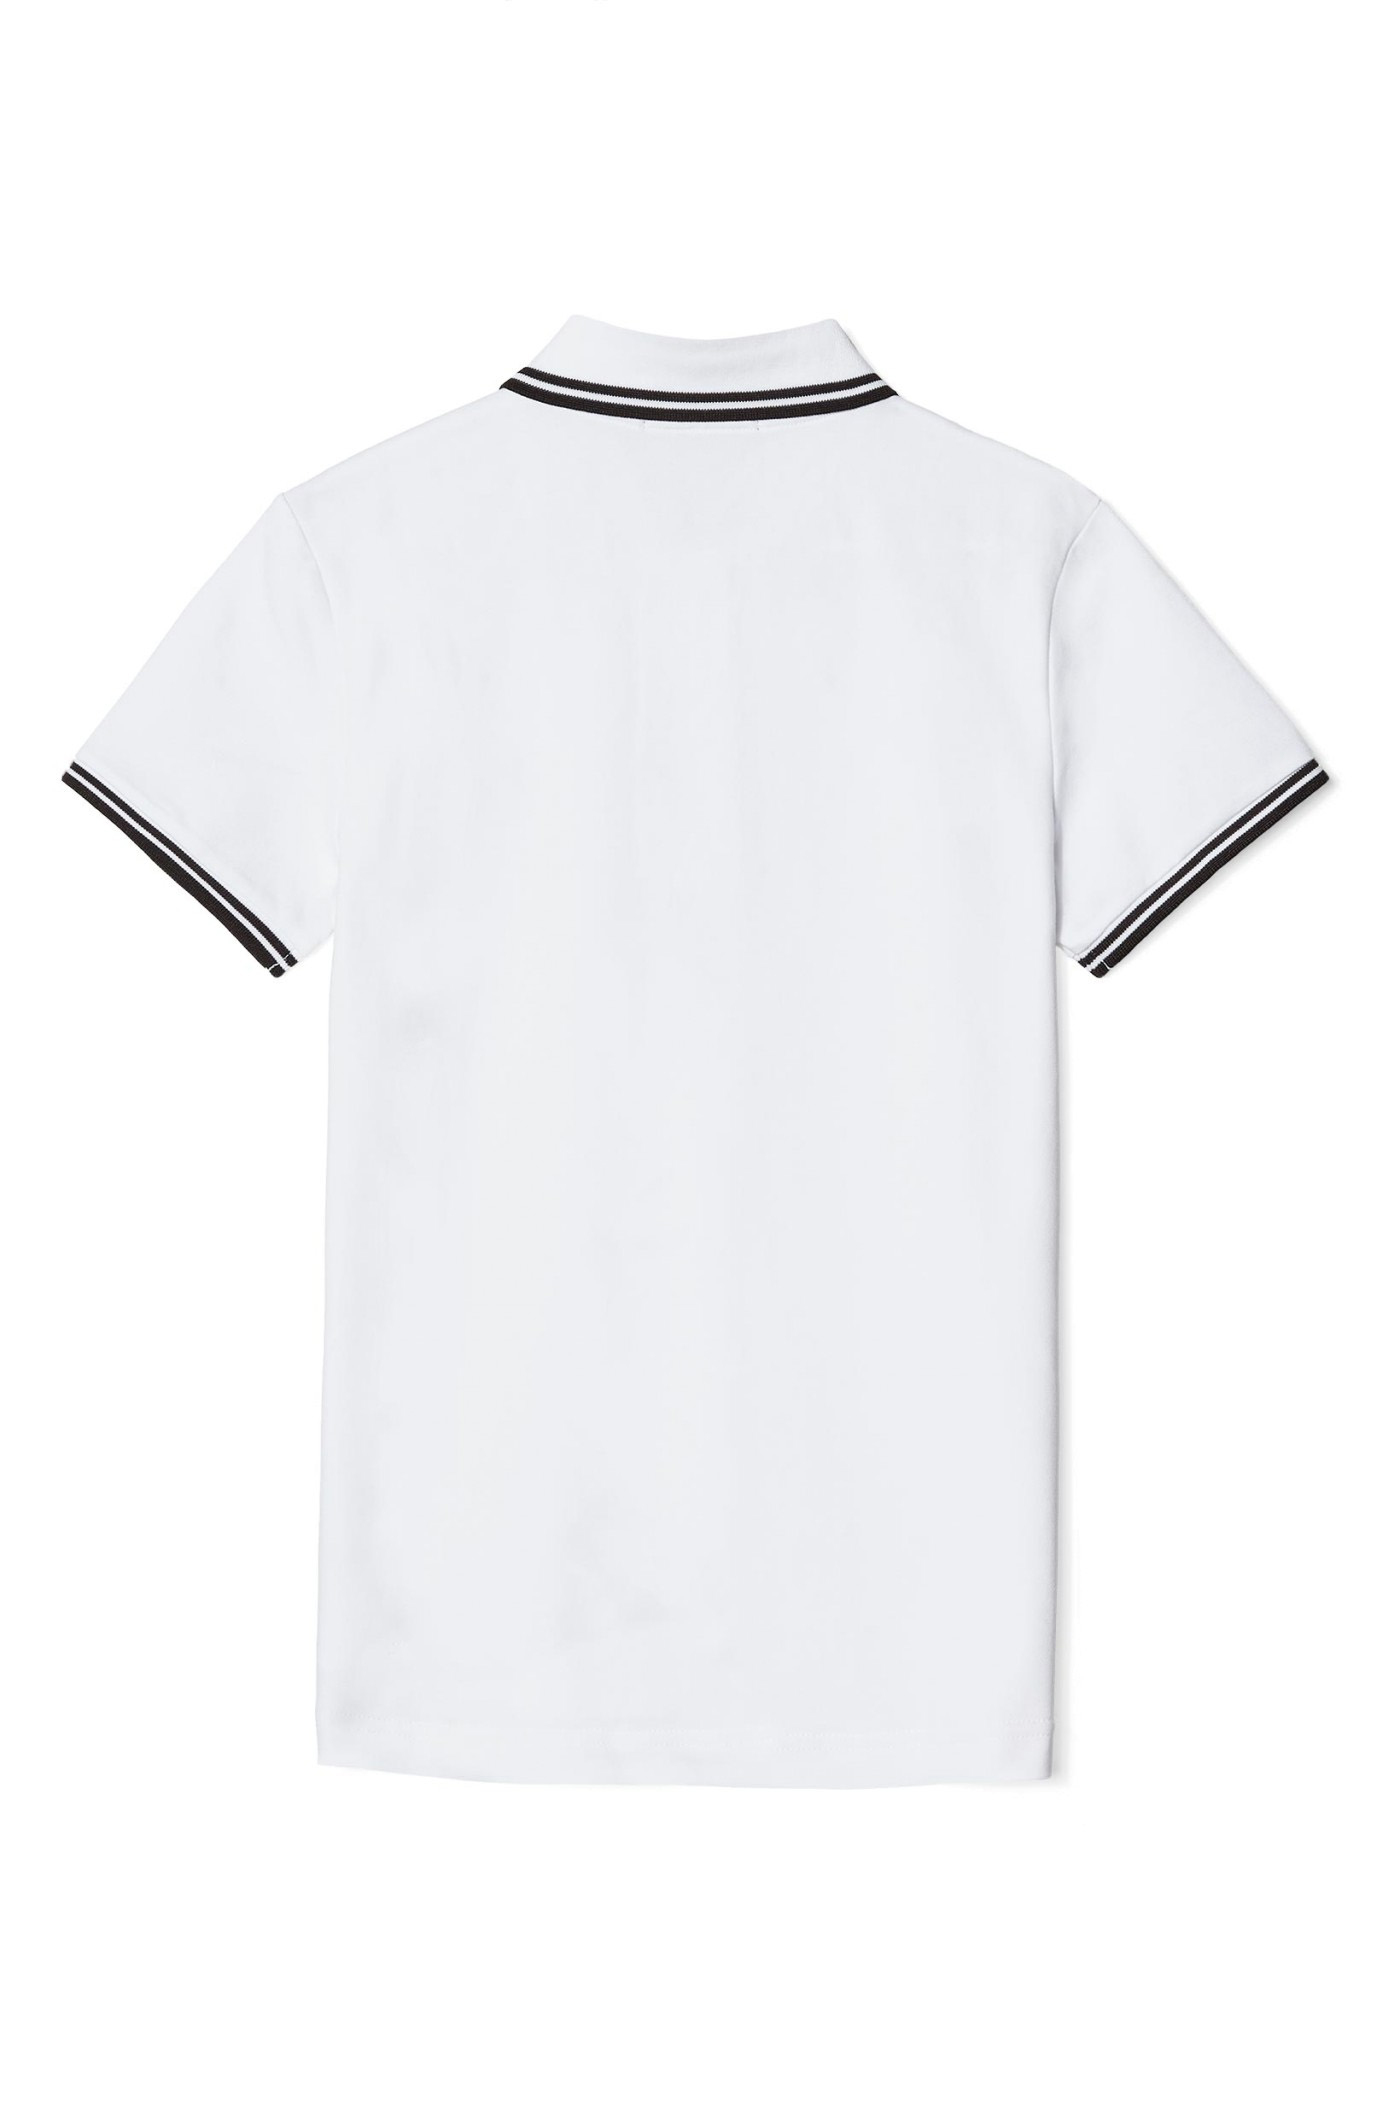 Fred Perry Twin Tipped Girls Polo Shirt- WHITE/BLACK